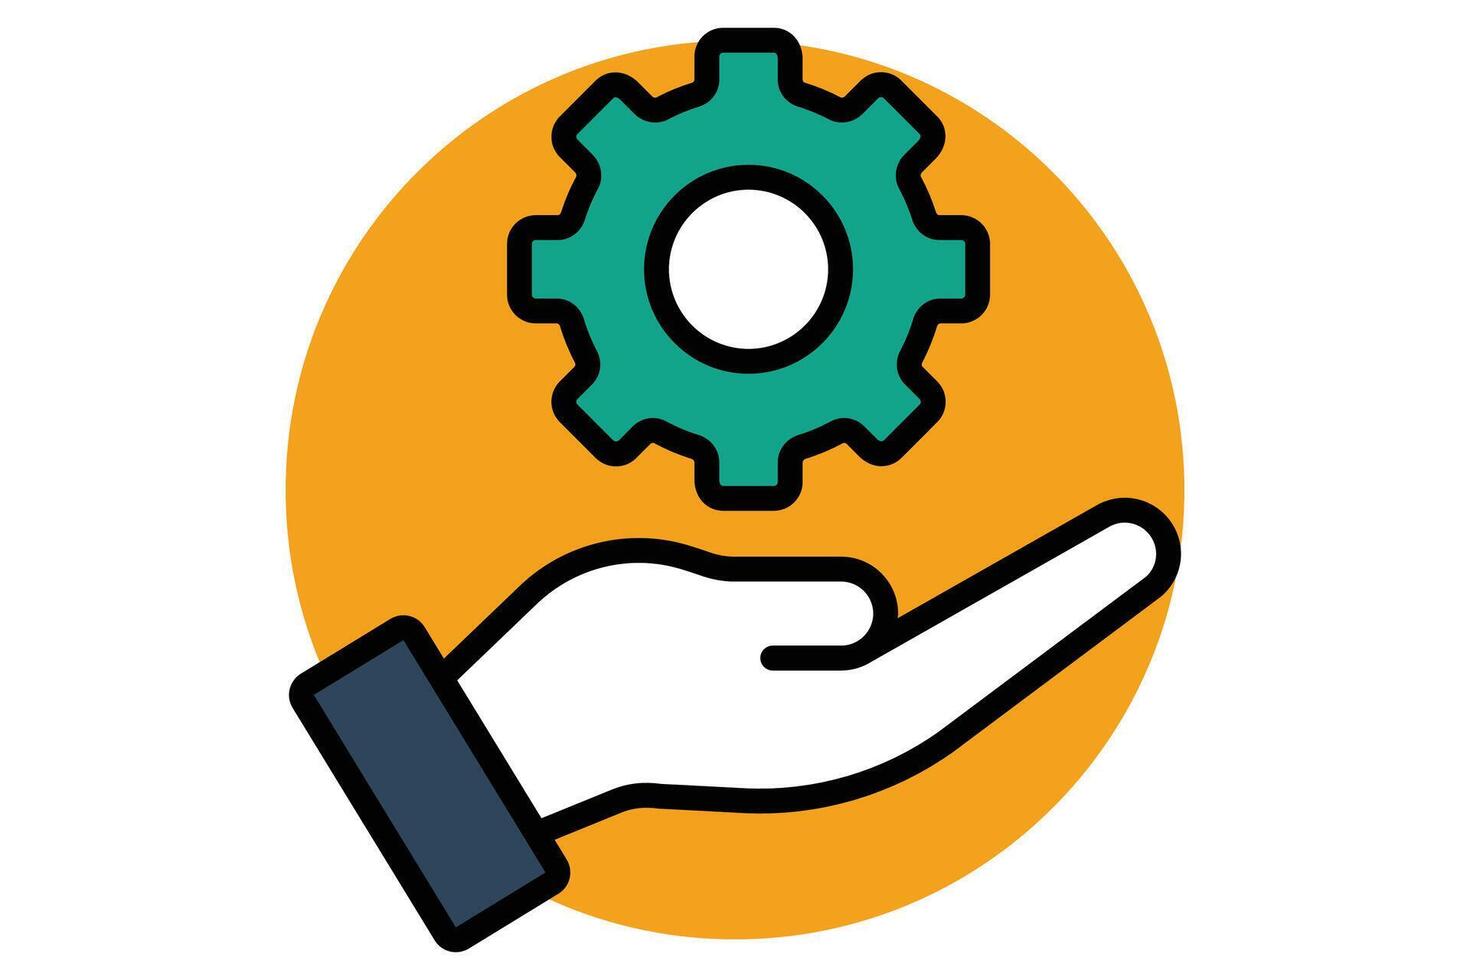 resource icon. hand with gear. icon related to action plan,  business. flat line icon style. business element illustration vector